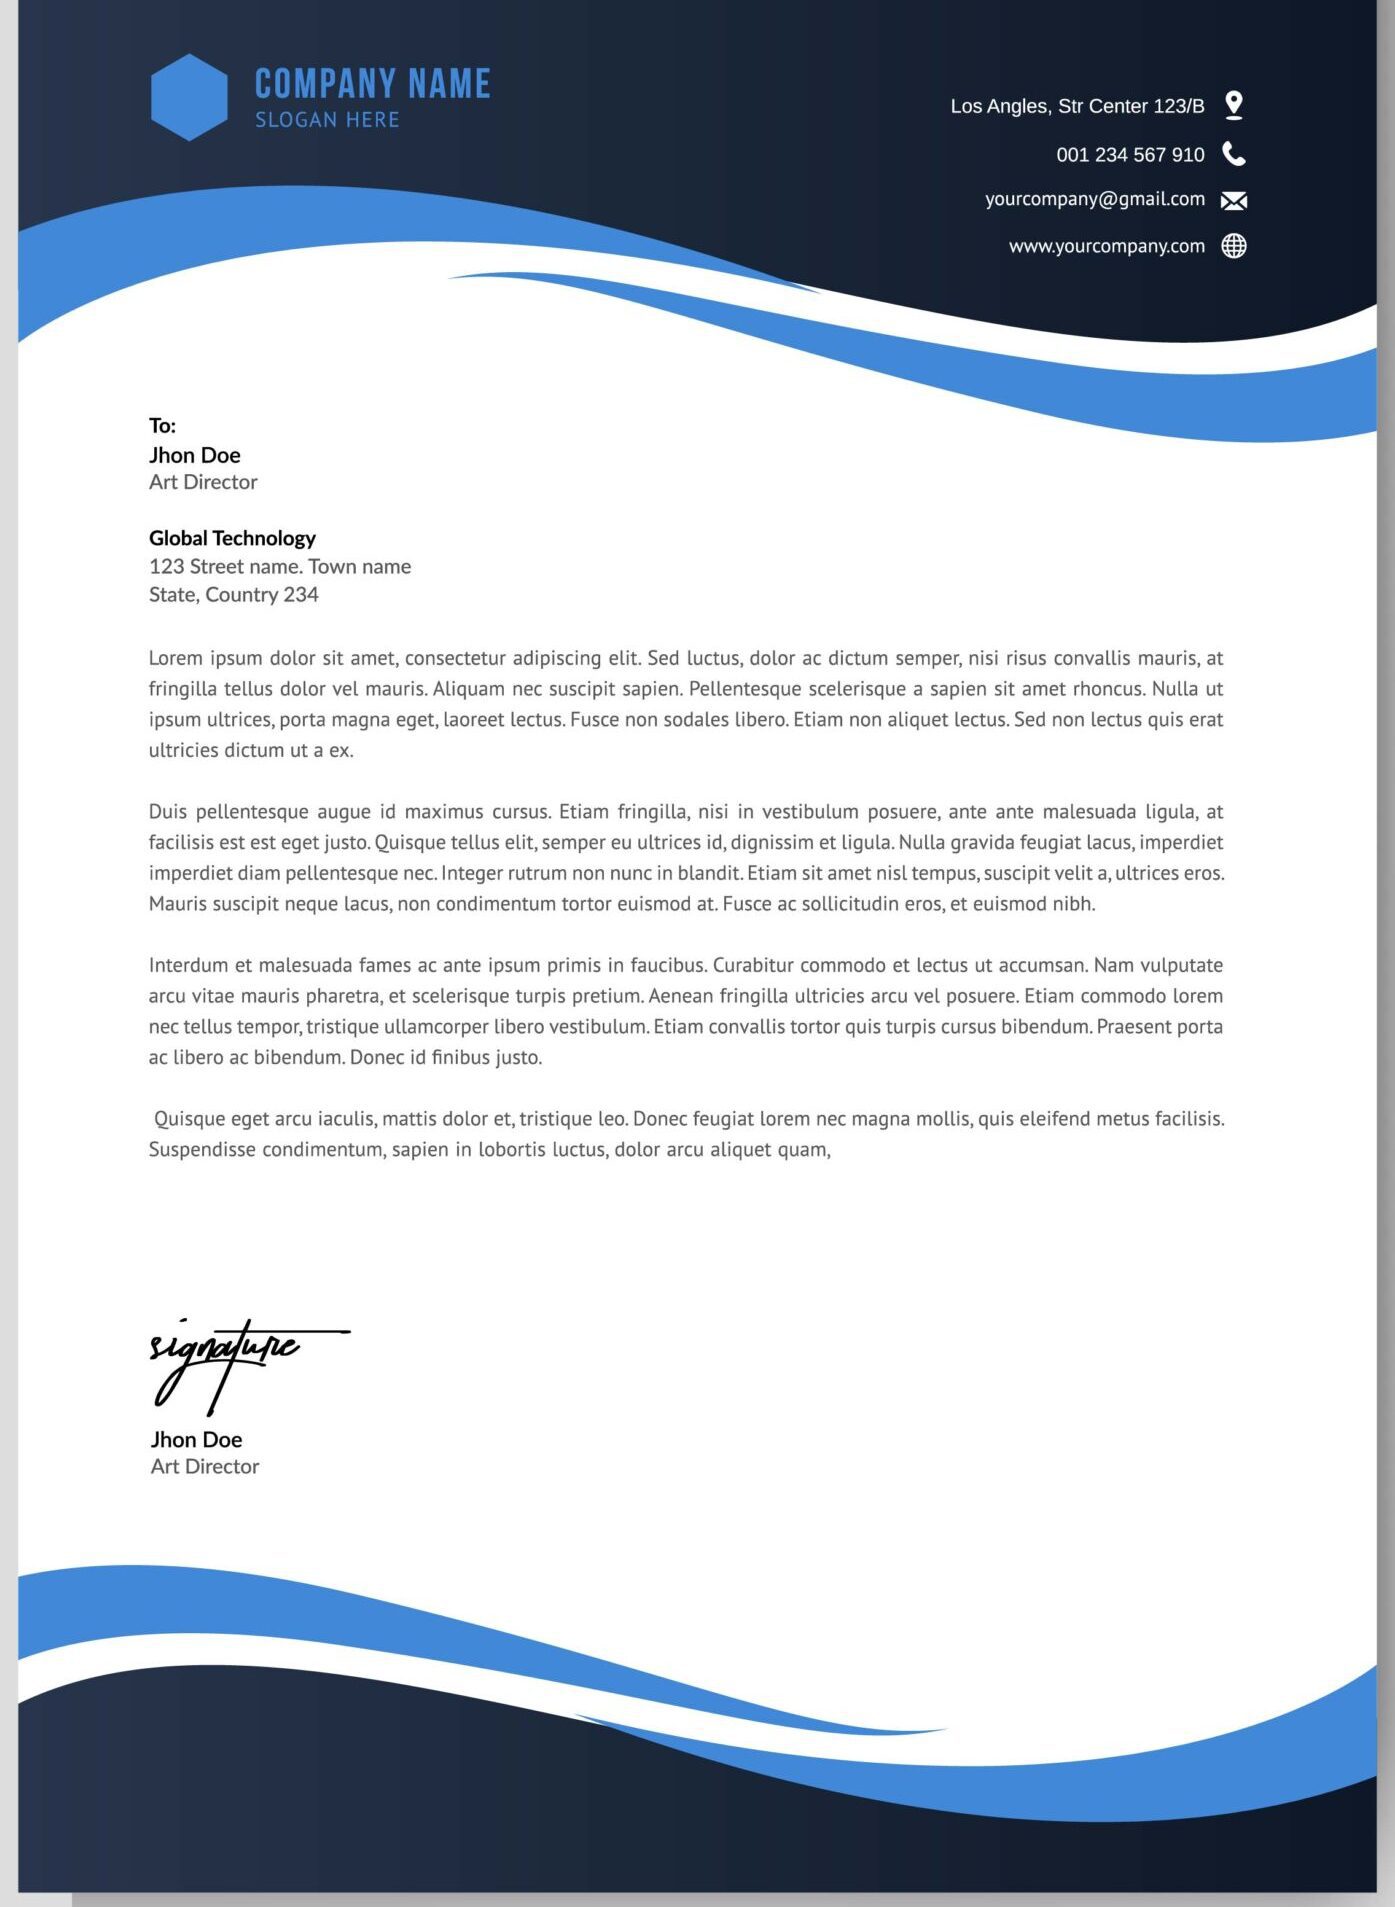 Fusion Marketing - Harness the Potential of Your Business Letterhead The Hidden Ingredient for Polished Correspondence - The Importance of Having a Personal Letterhead Template